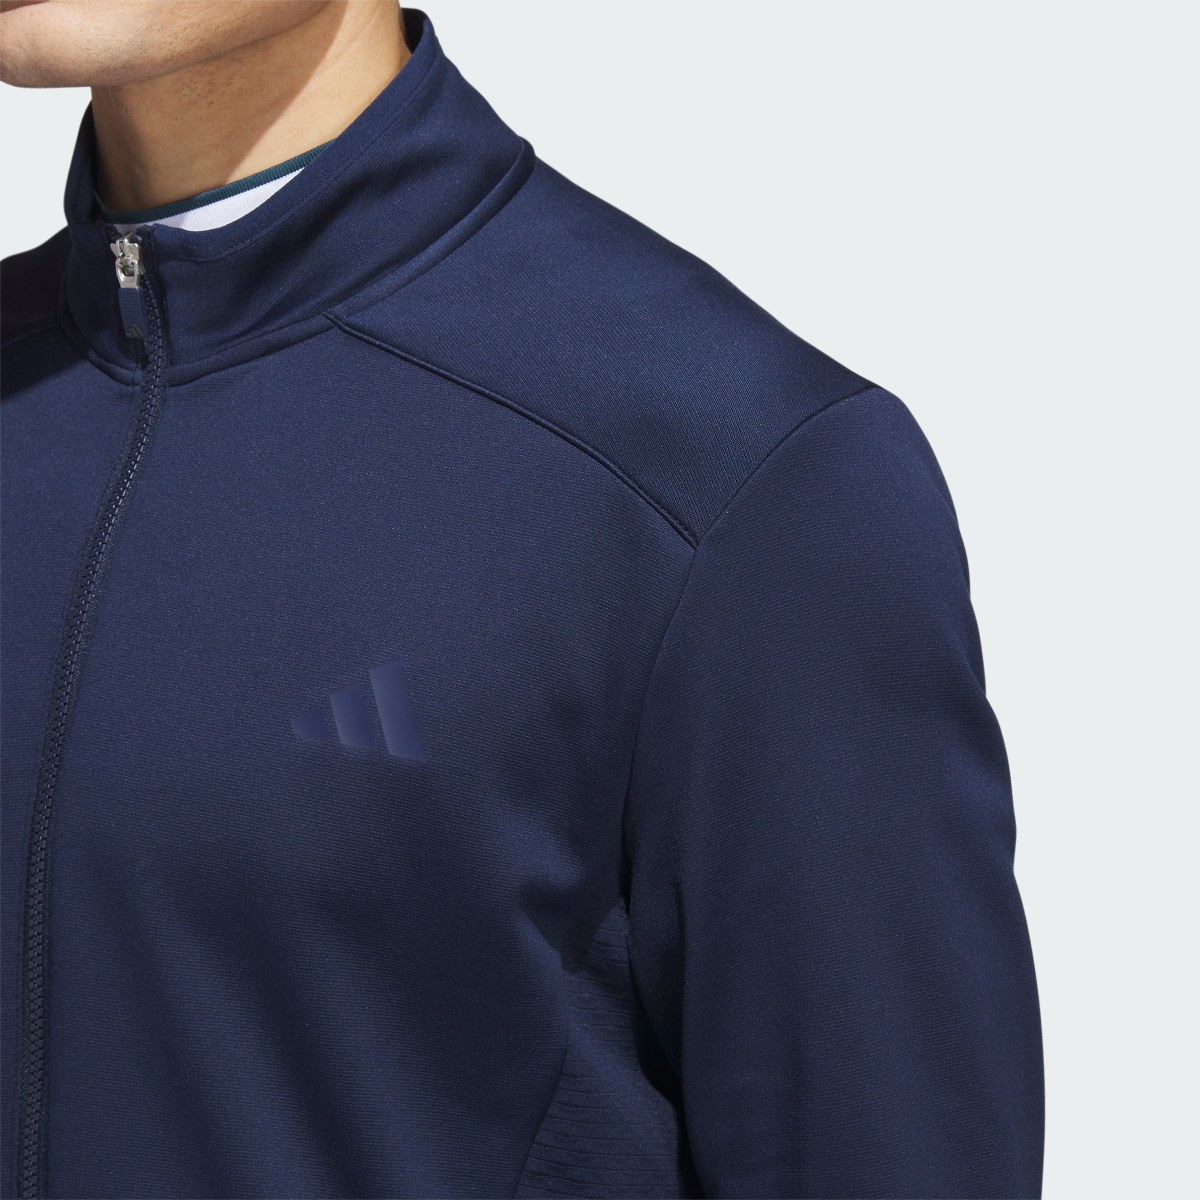 Adidas COLD.RDY Full-Zip Jacket. 6